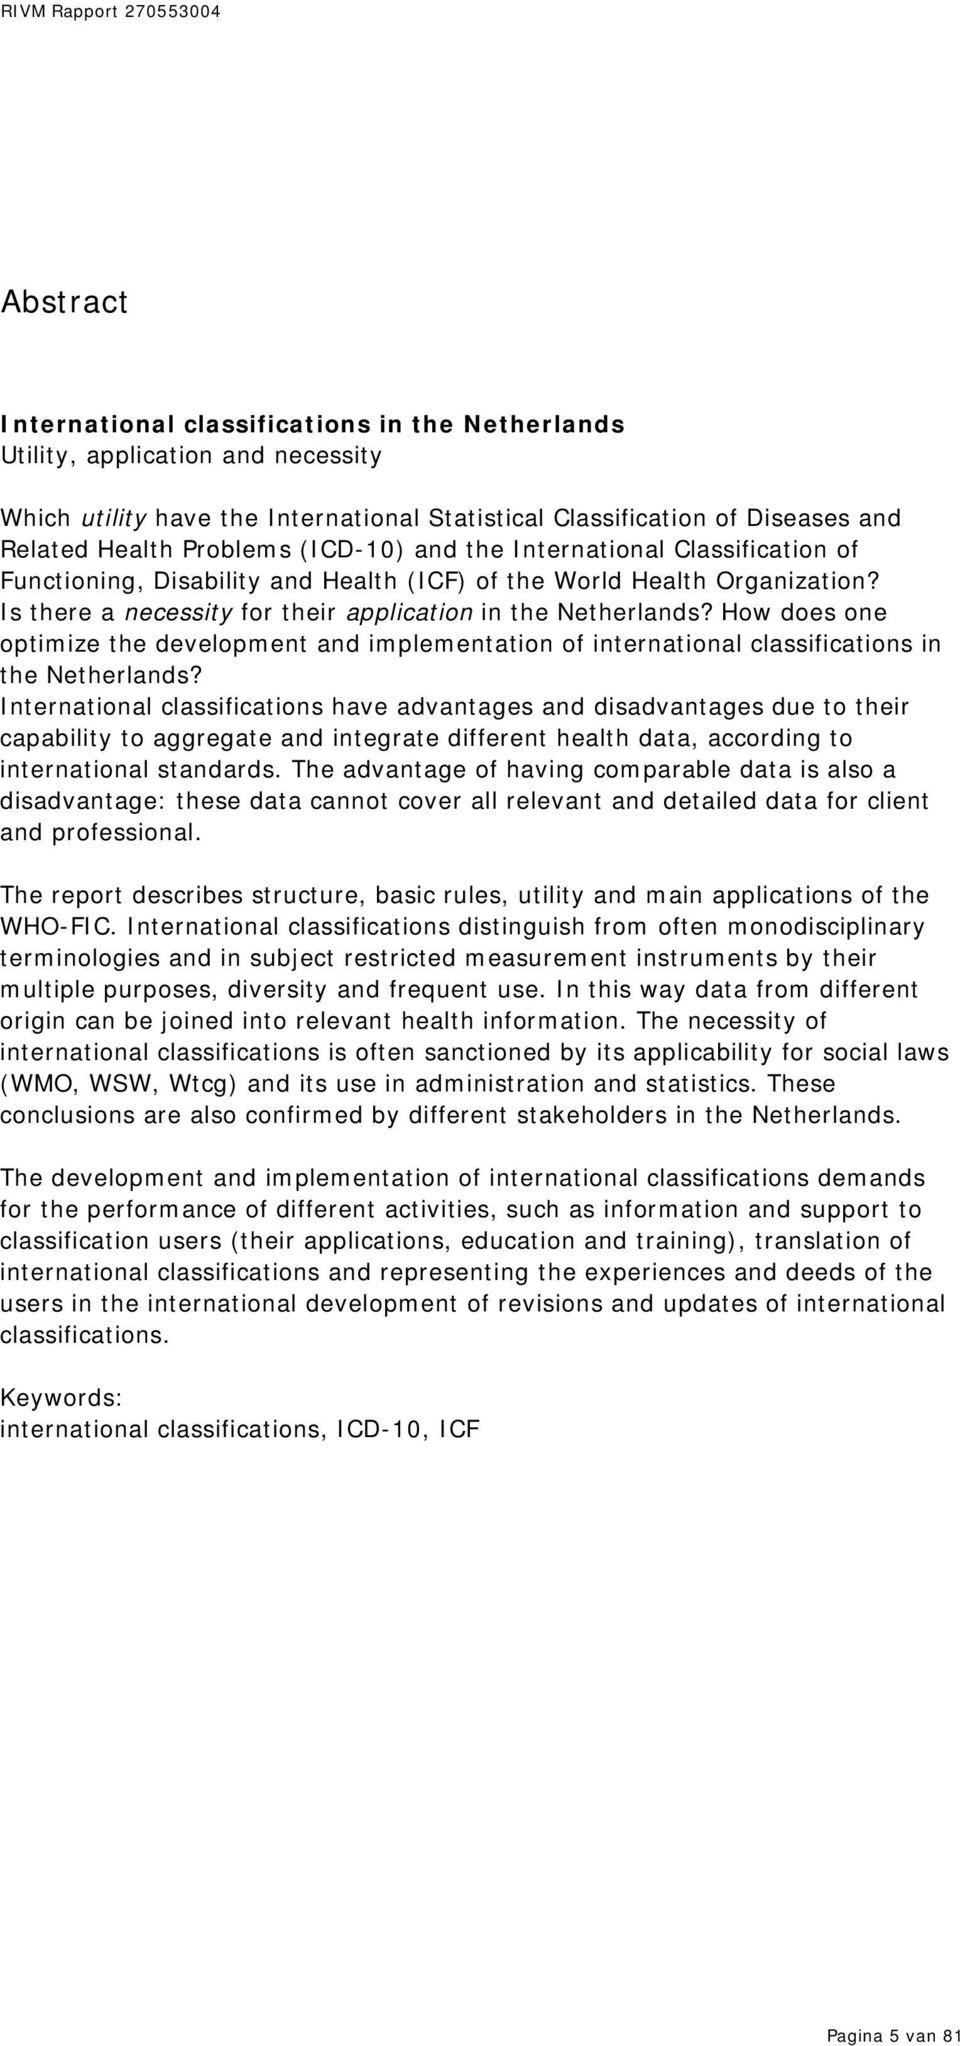 How does one optimize the development and implementation of international classifications in the Netherlands?